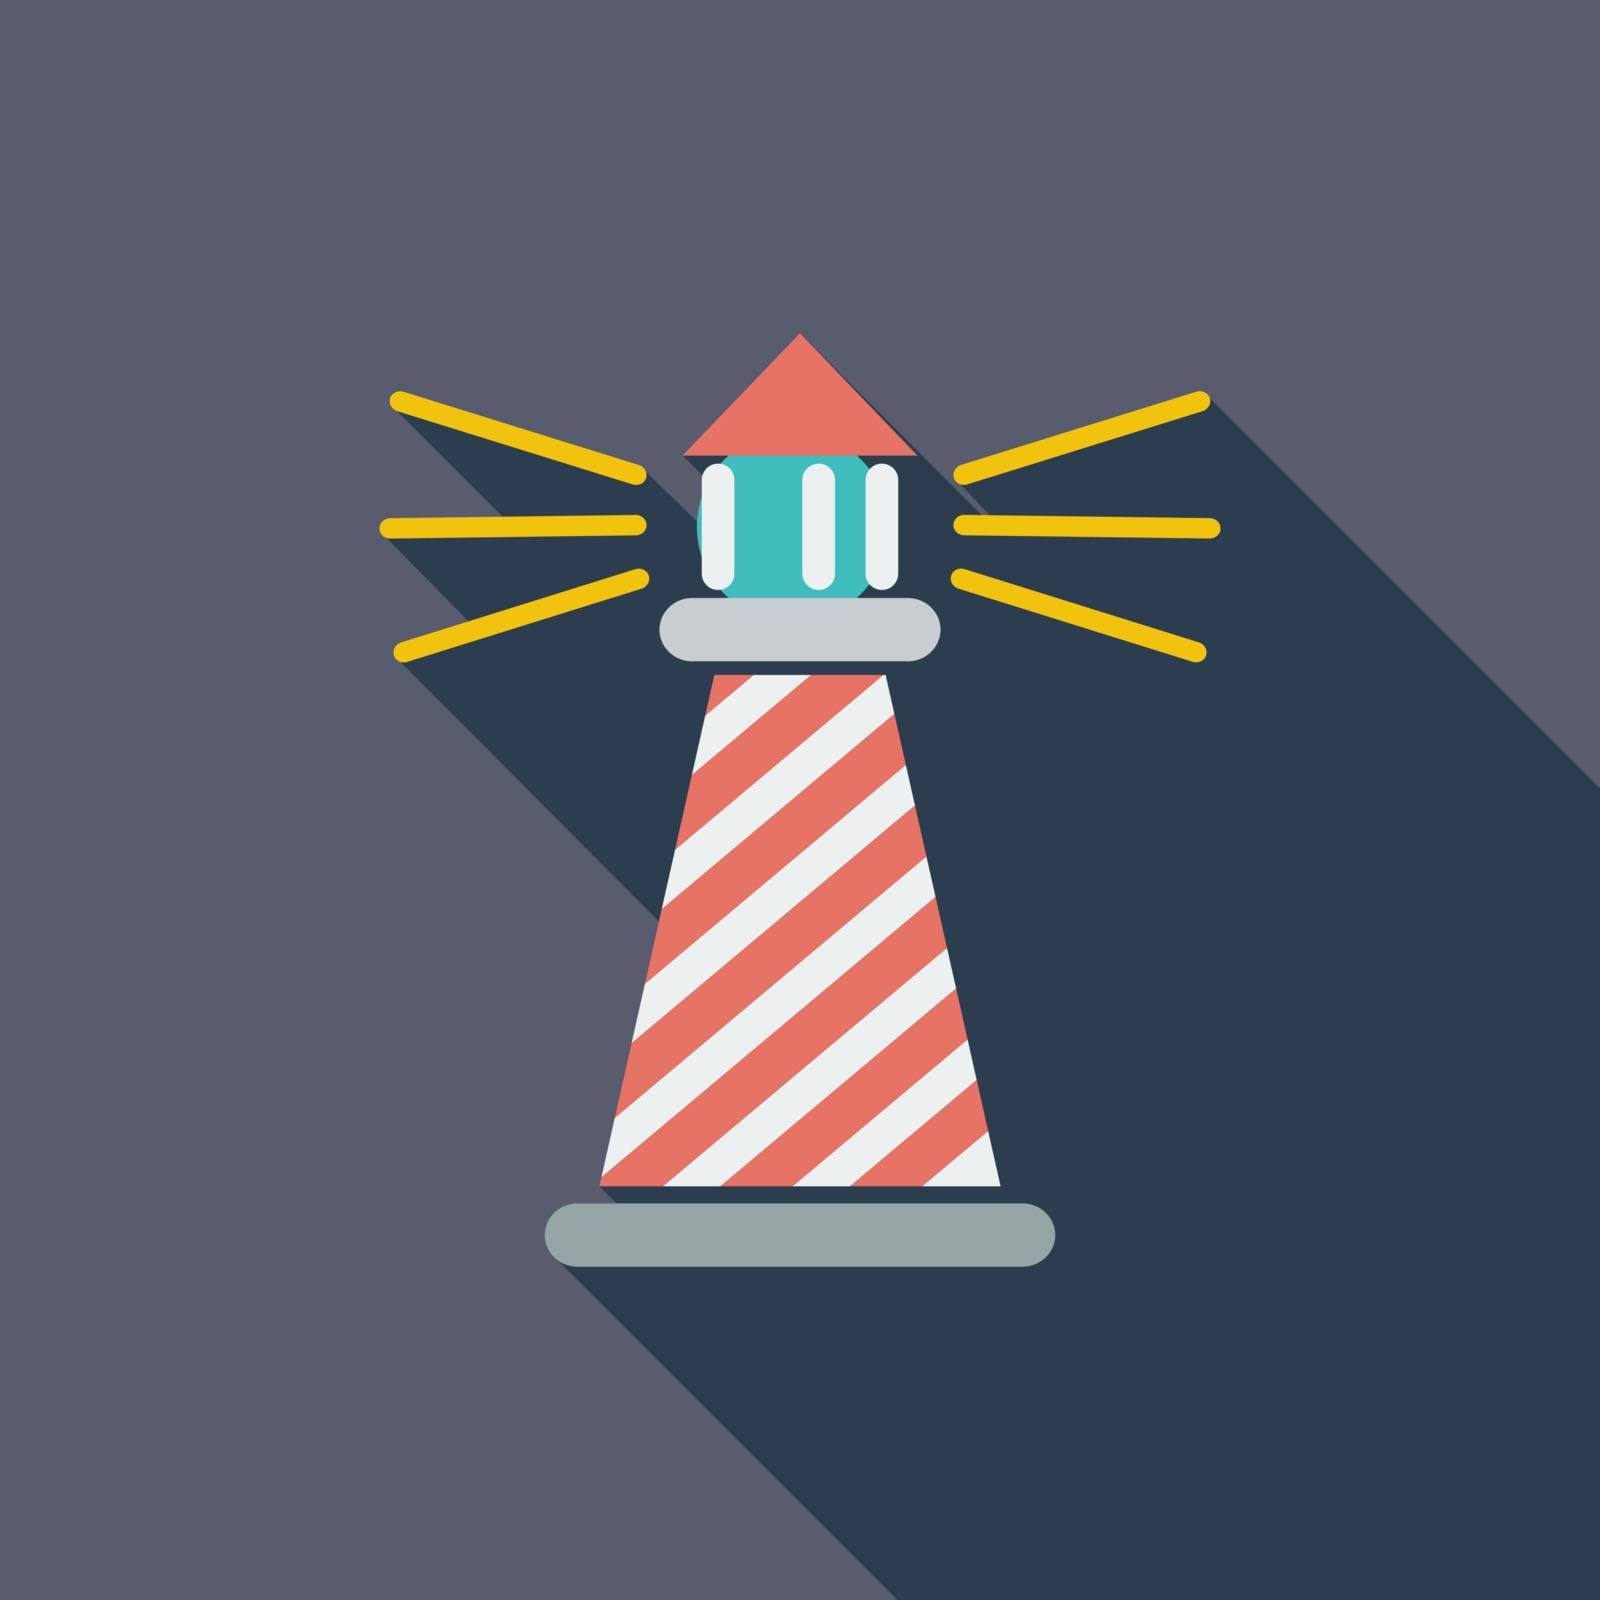 Lighthouse icon. Flat vector related icon with long shadow for web and mobile applications. It can be used as - logo, pictogram, icon, infographic element. Vector Illustration.